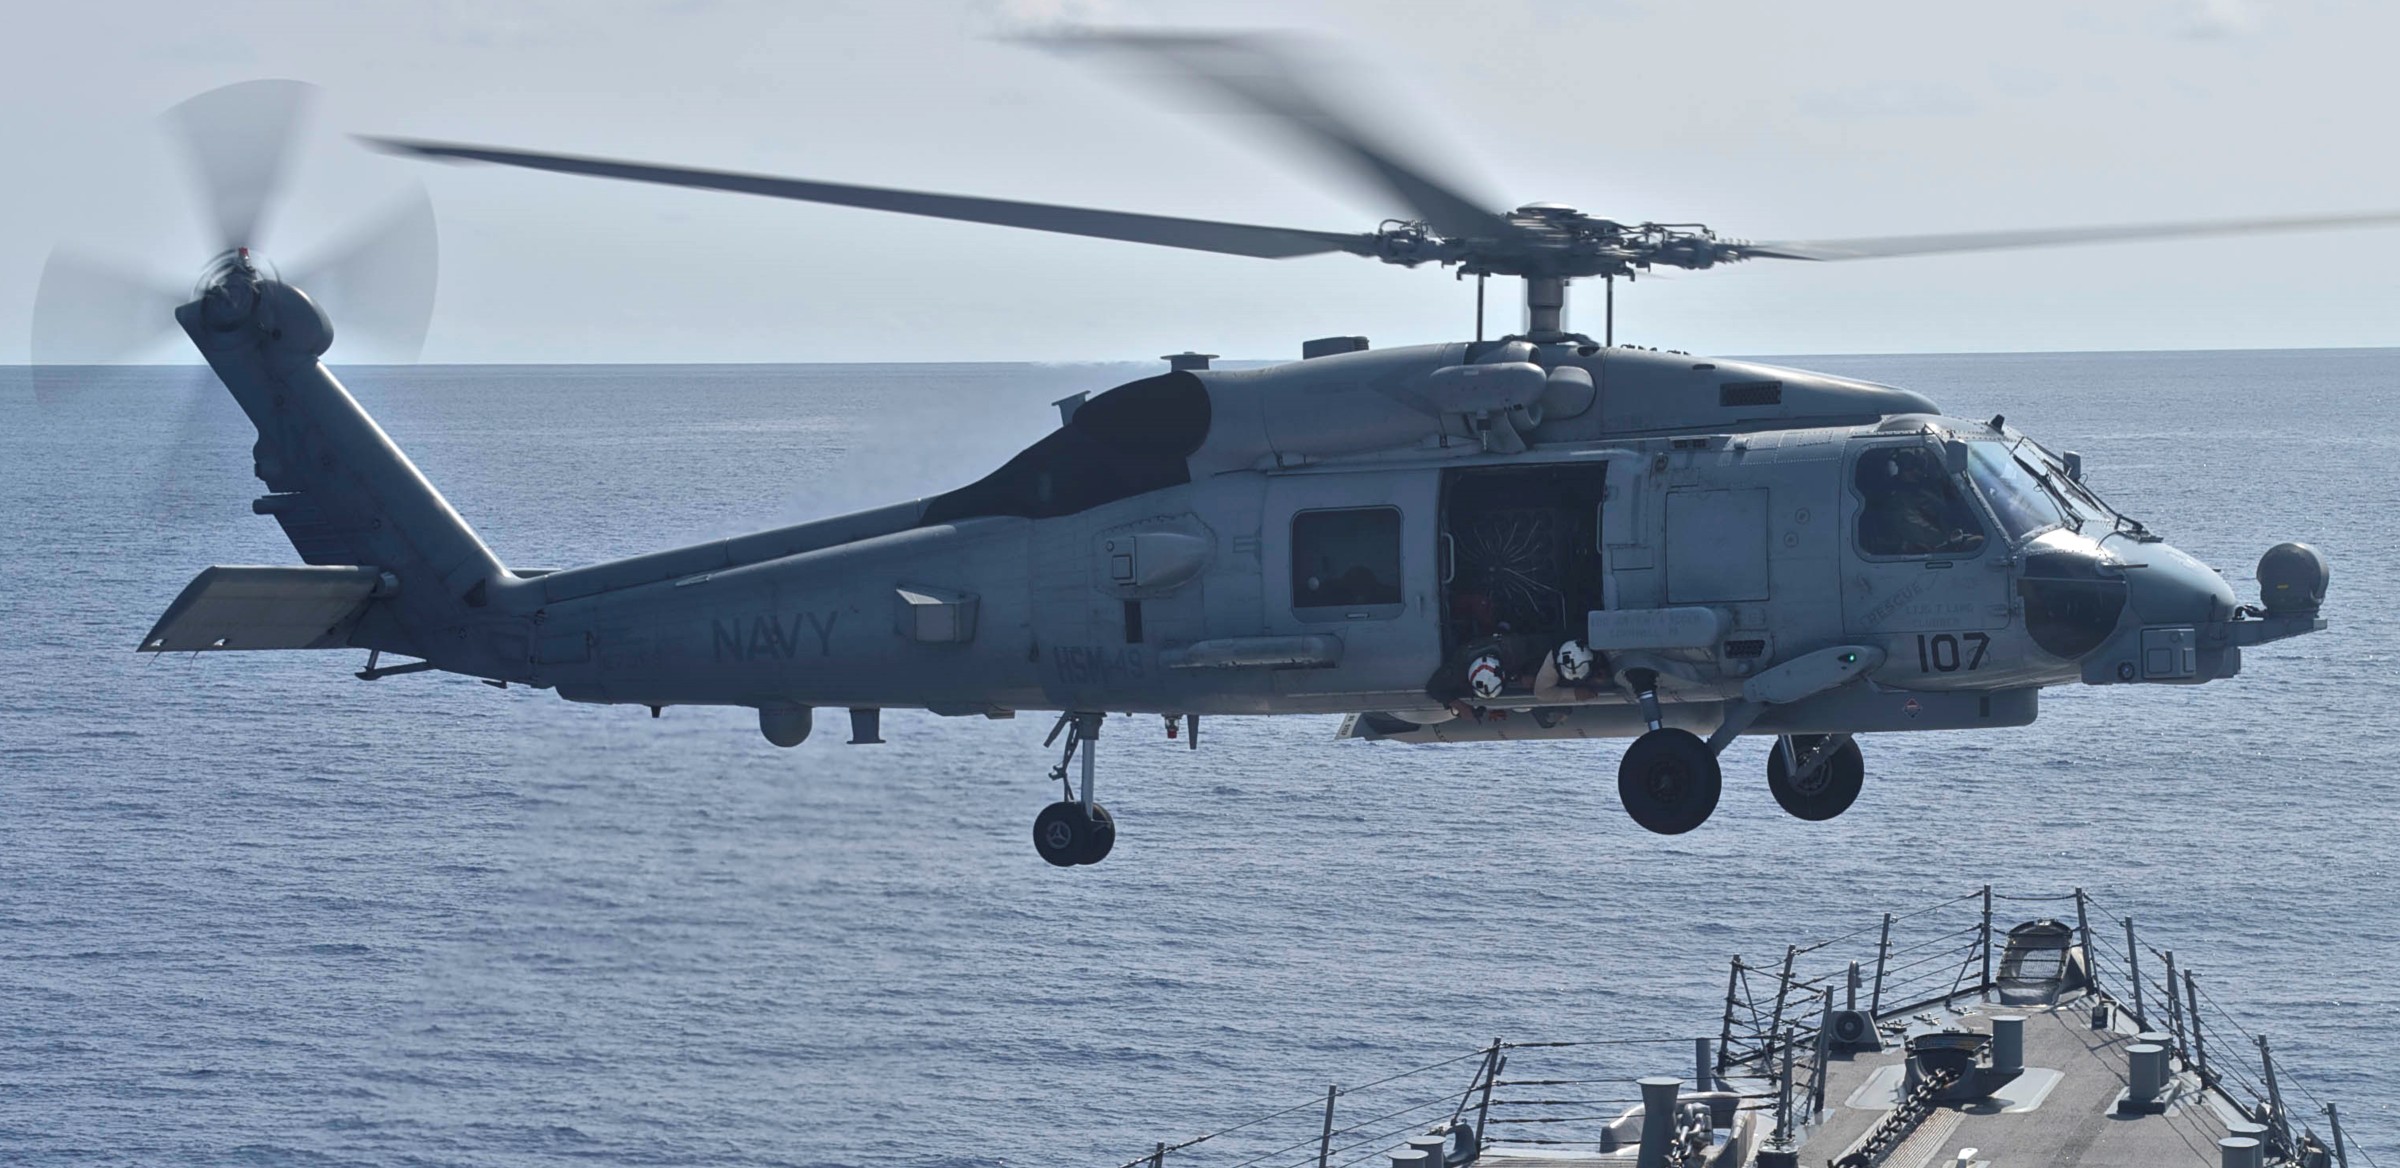 hsm-49 scorpions helicopter maritime strike squadron mh-60r seahawk 2016 06 uss decatur ddg-73